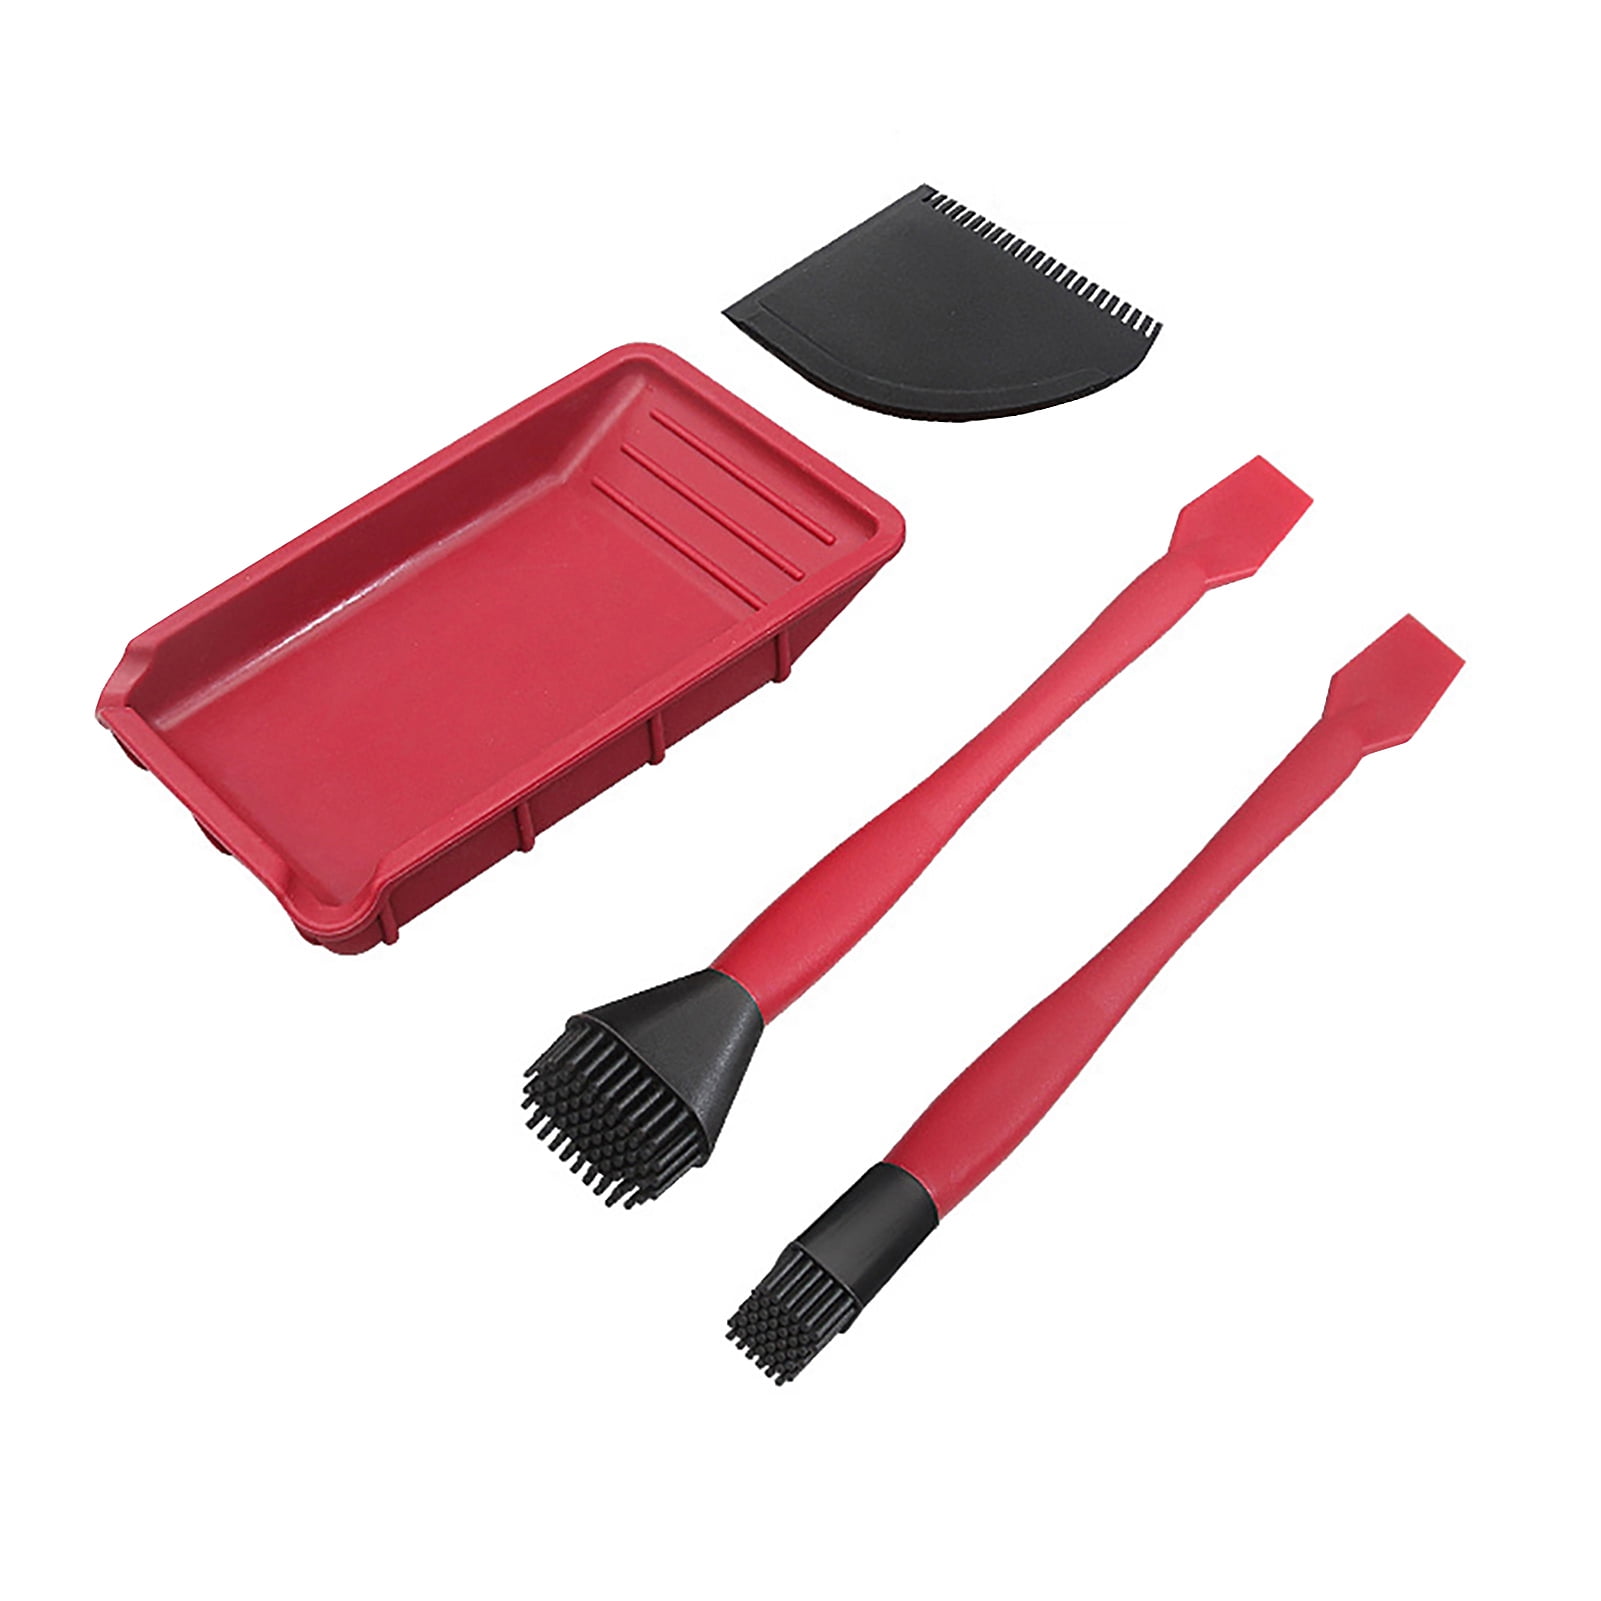  The Complete Silicone Glue Kit Wood Glue Up 4Piece Kit 2 Pack  of Silicone Brushes 1 Tray 1 Comb Woodworking Glue Spreader Applicator Set  : Tools & Home Improvement